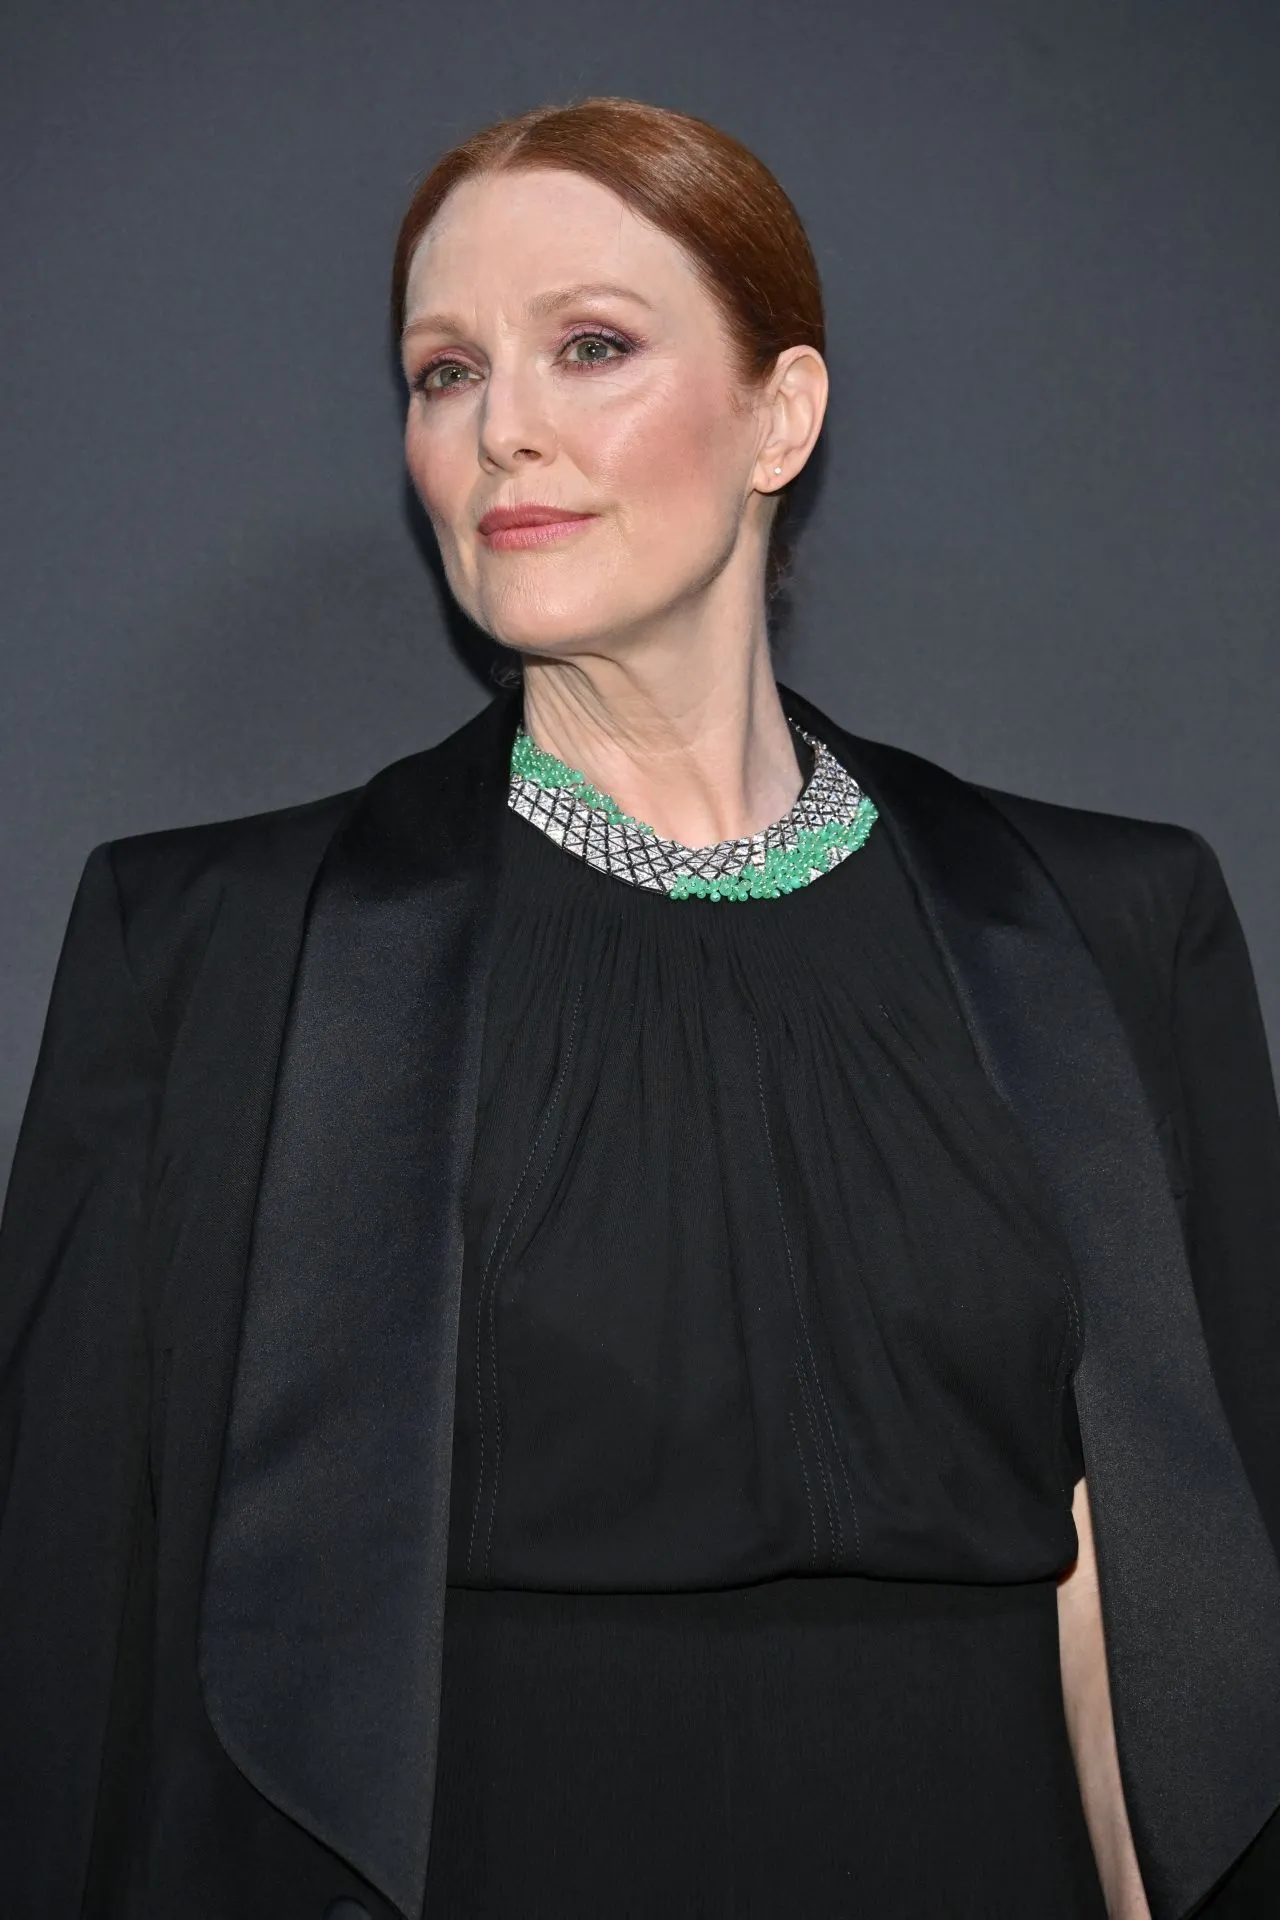 JULIANNE MOORE AT KERING WOMEN IN MOTION AWARDS AT CANNES FILM FESTIVAL3